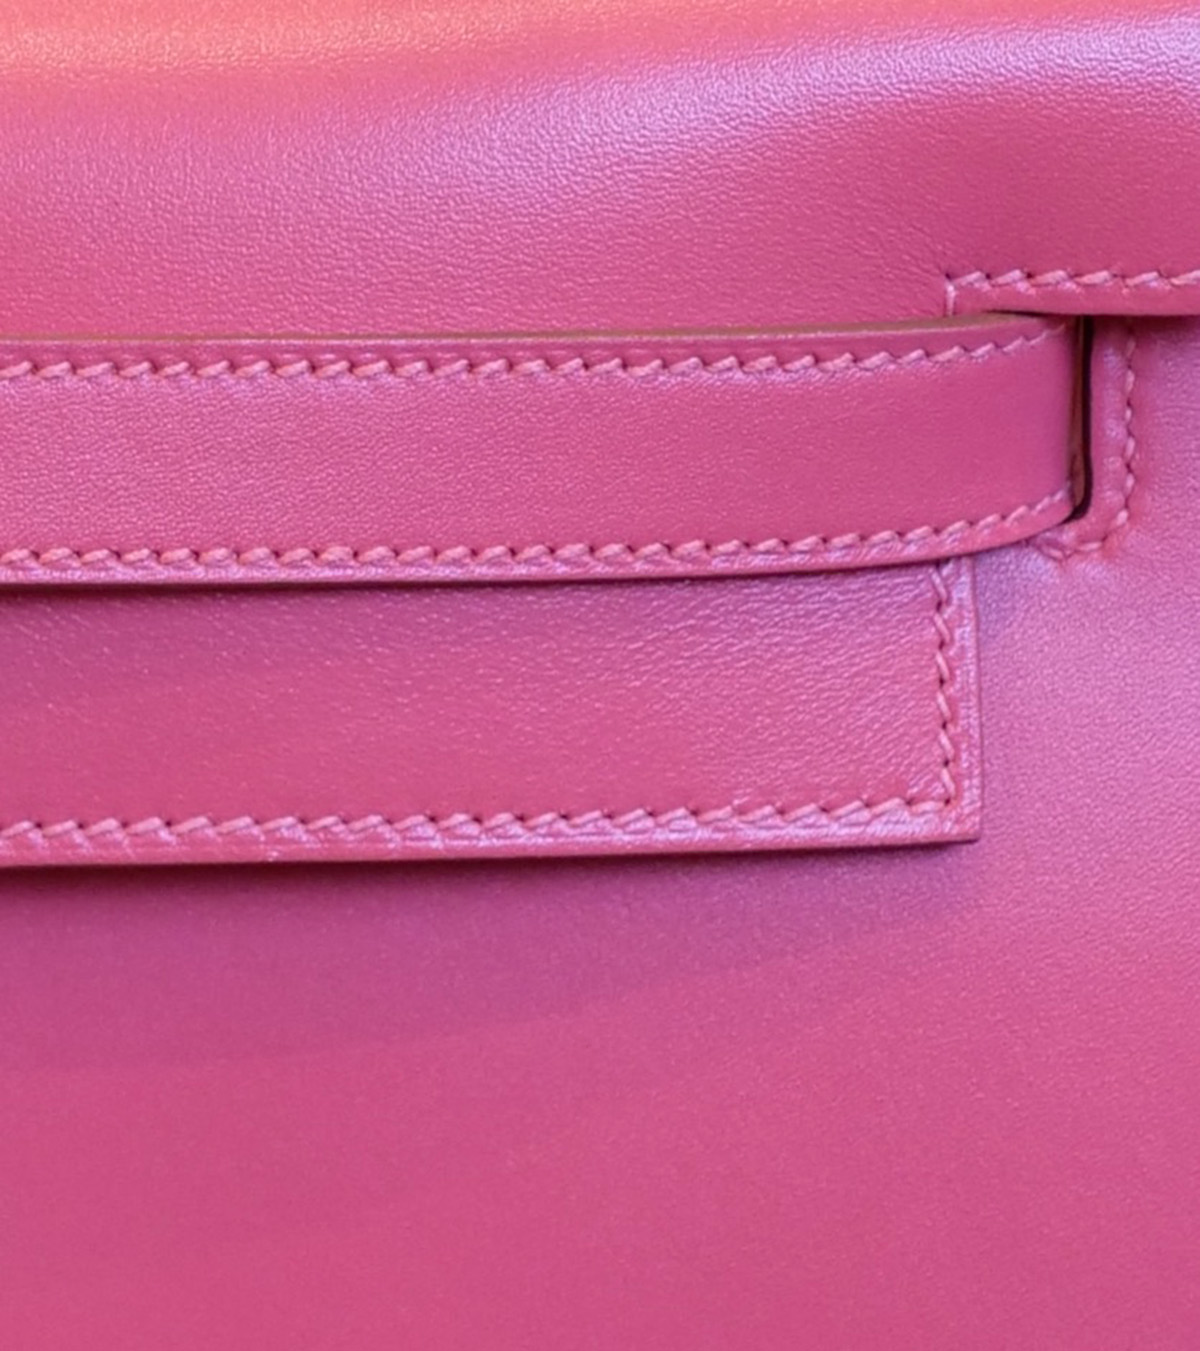 A Guide Into Hermès Leathers and Skins